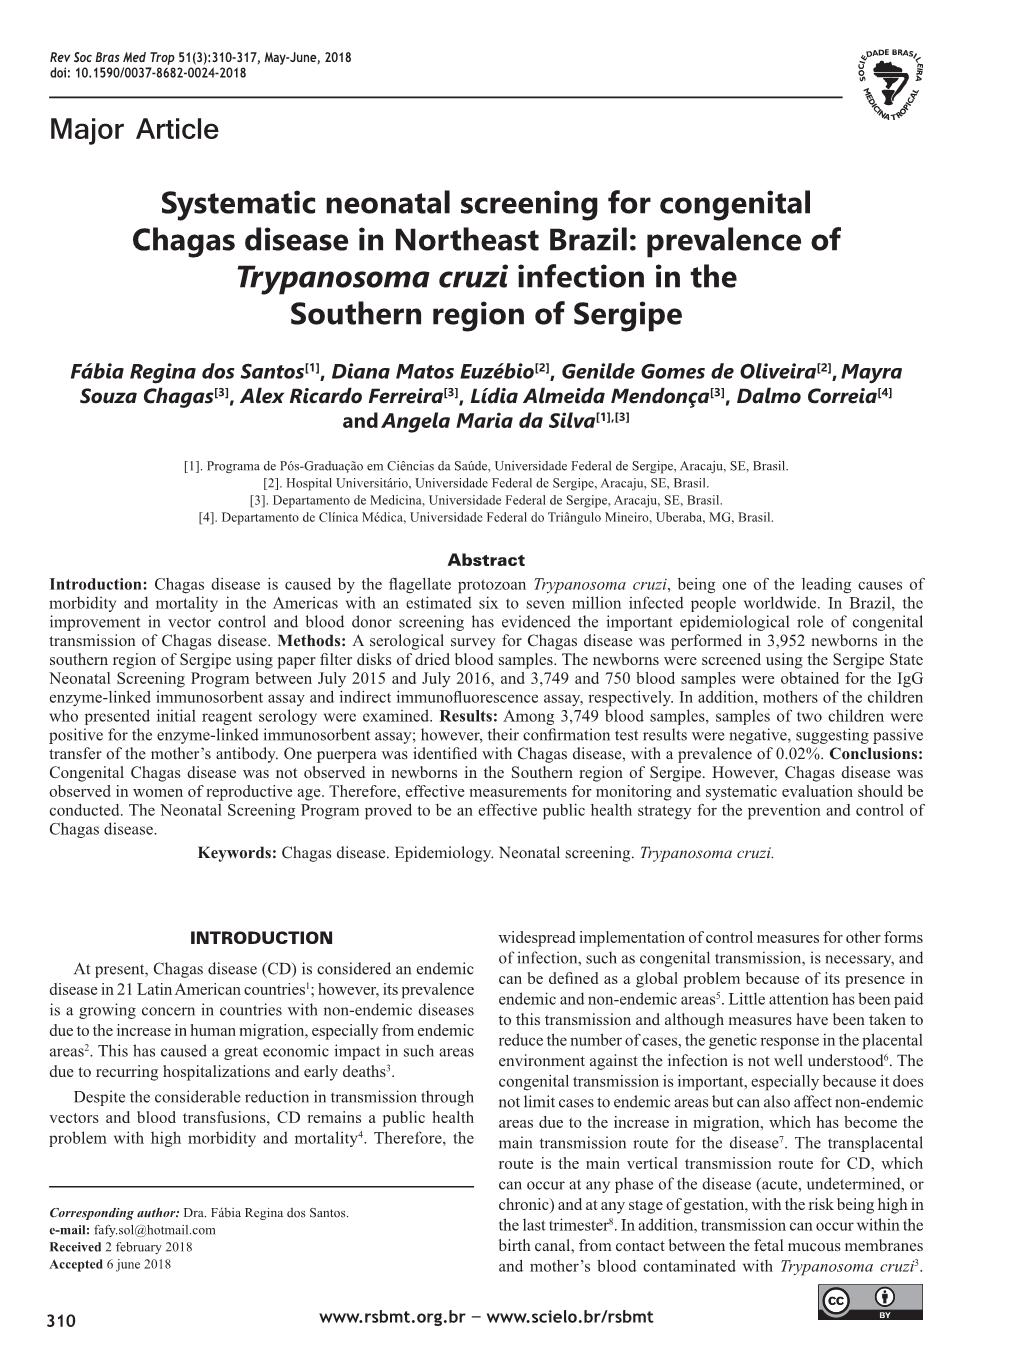 Major Article Systematic Neonatal Screening for Congenital Chagas